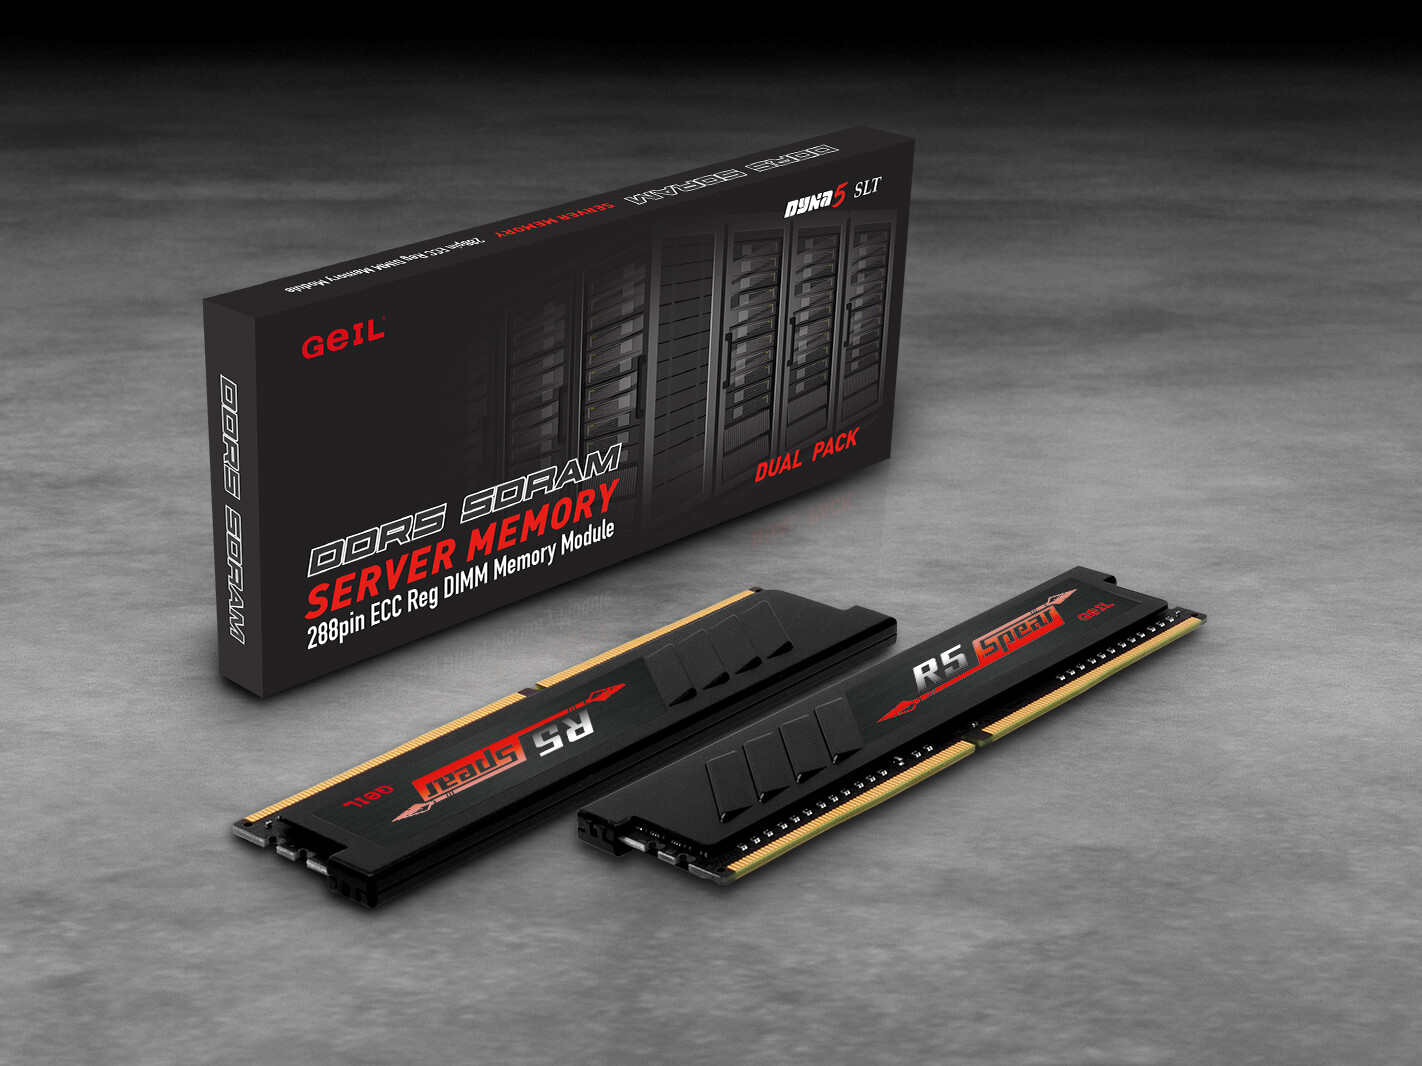 GeIL Orion AMD Edition DDR4-3200 16GB Dual-Channel Memory Kit Review